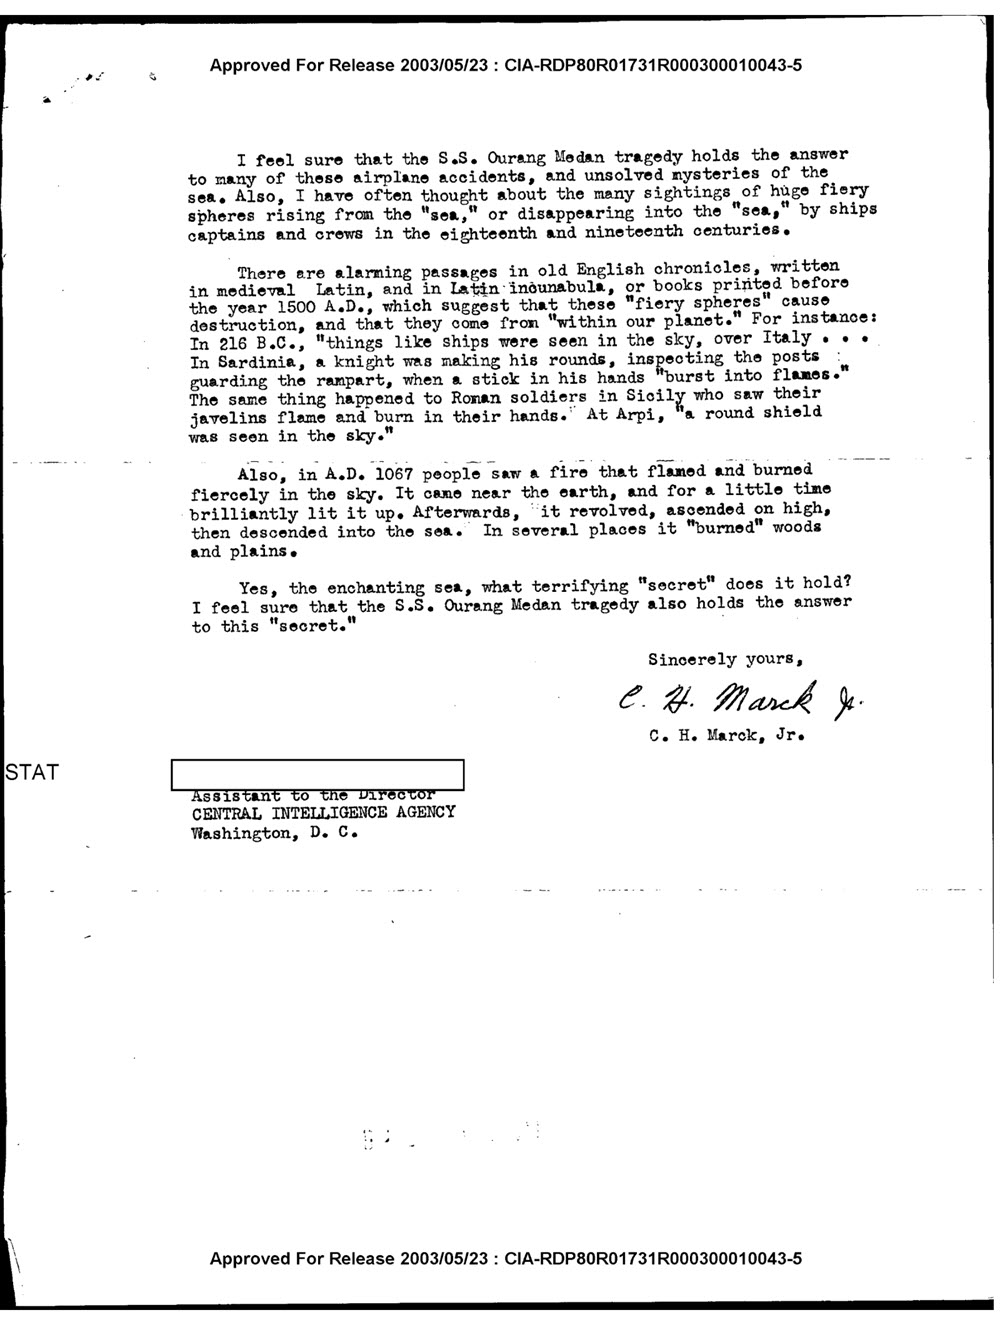 CIA Letter To (Sanitized) From C.H. Marck, Jr.  December 5, 1959, Page 2